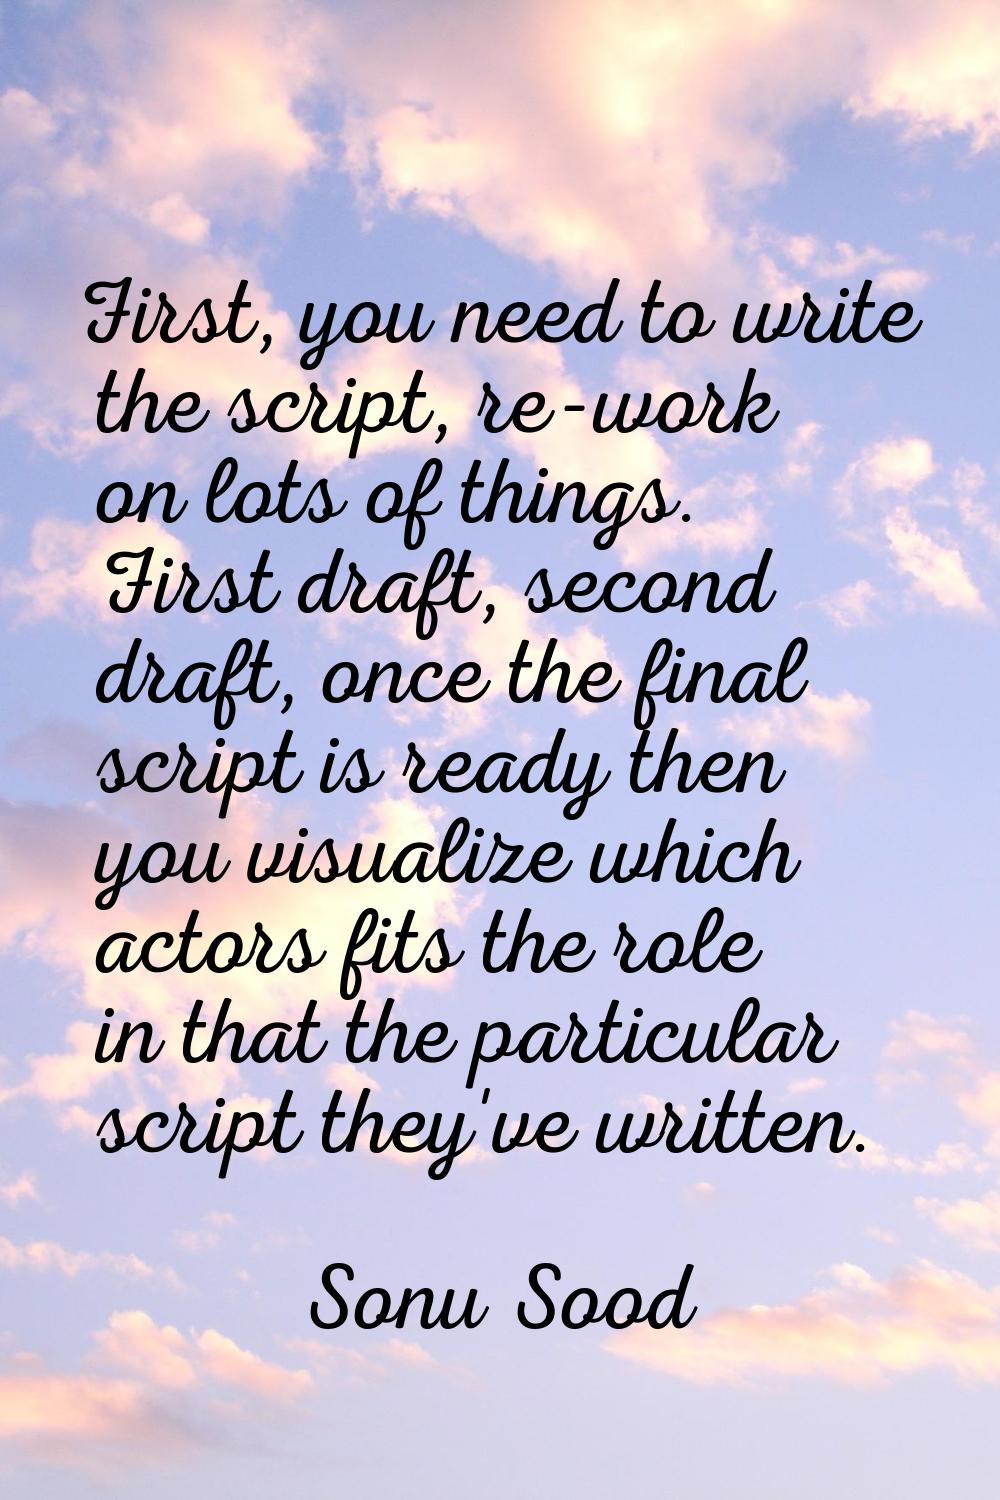 First, you need to write the script, re-work on lots of things. First draft, second draft, once the